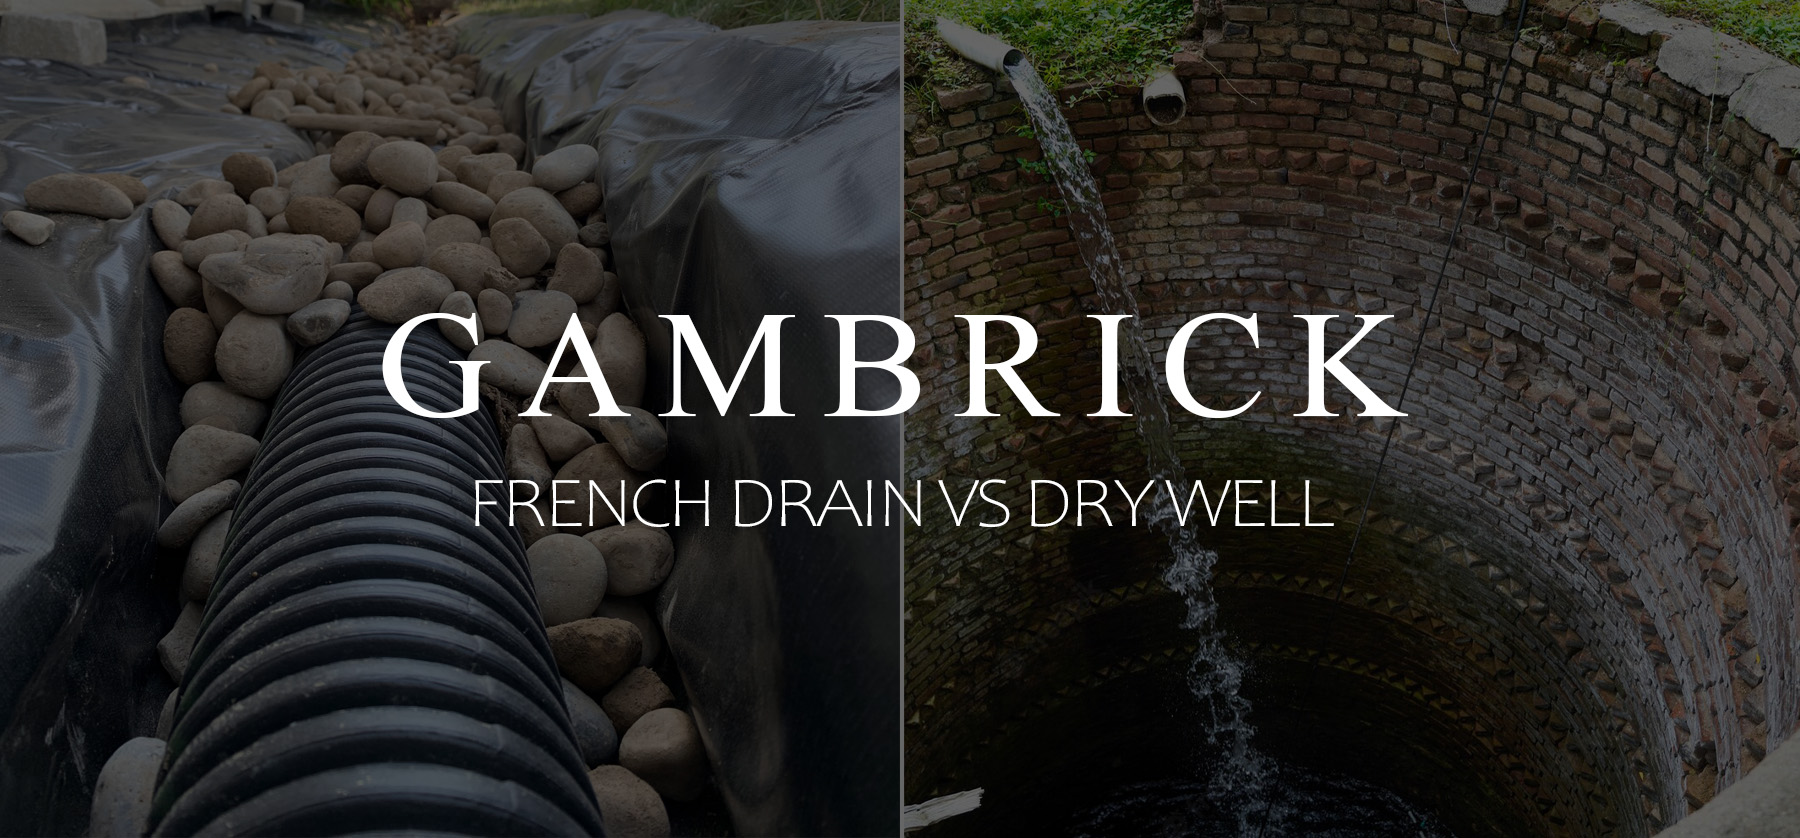 French Drain vs Dry Well banner 1.0